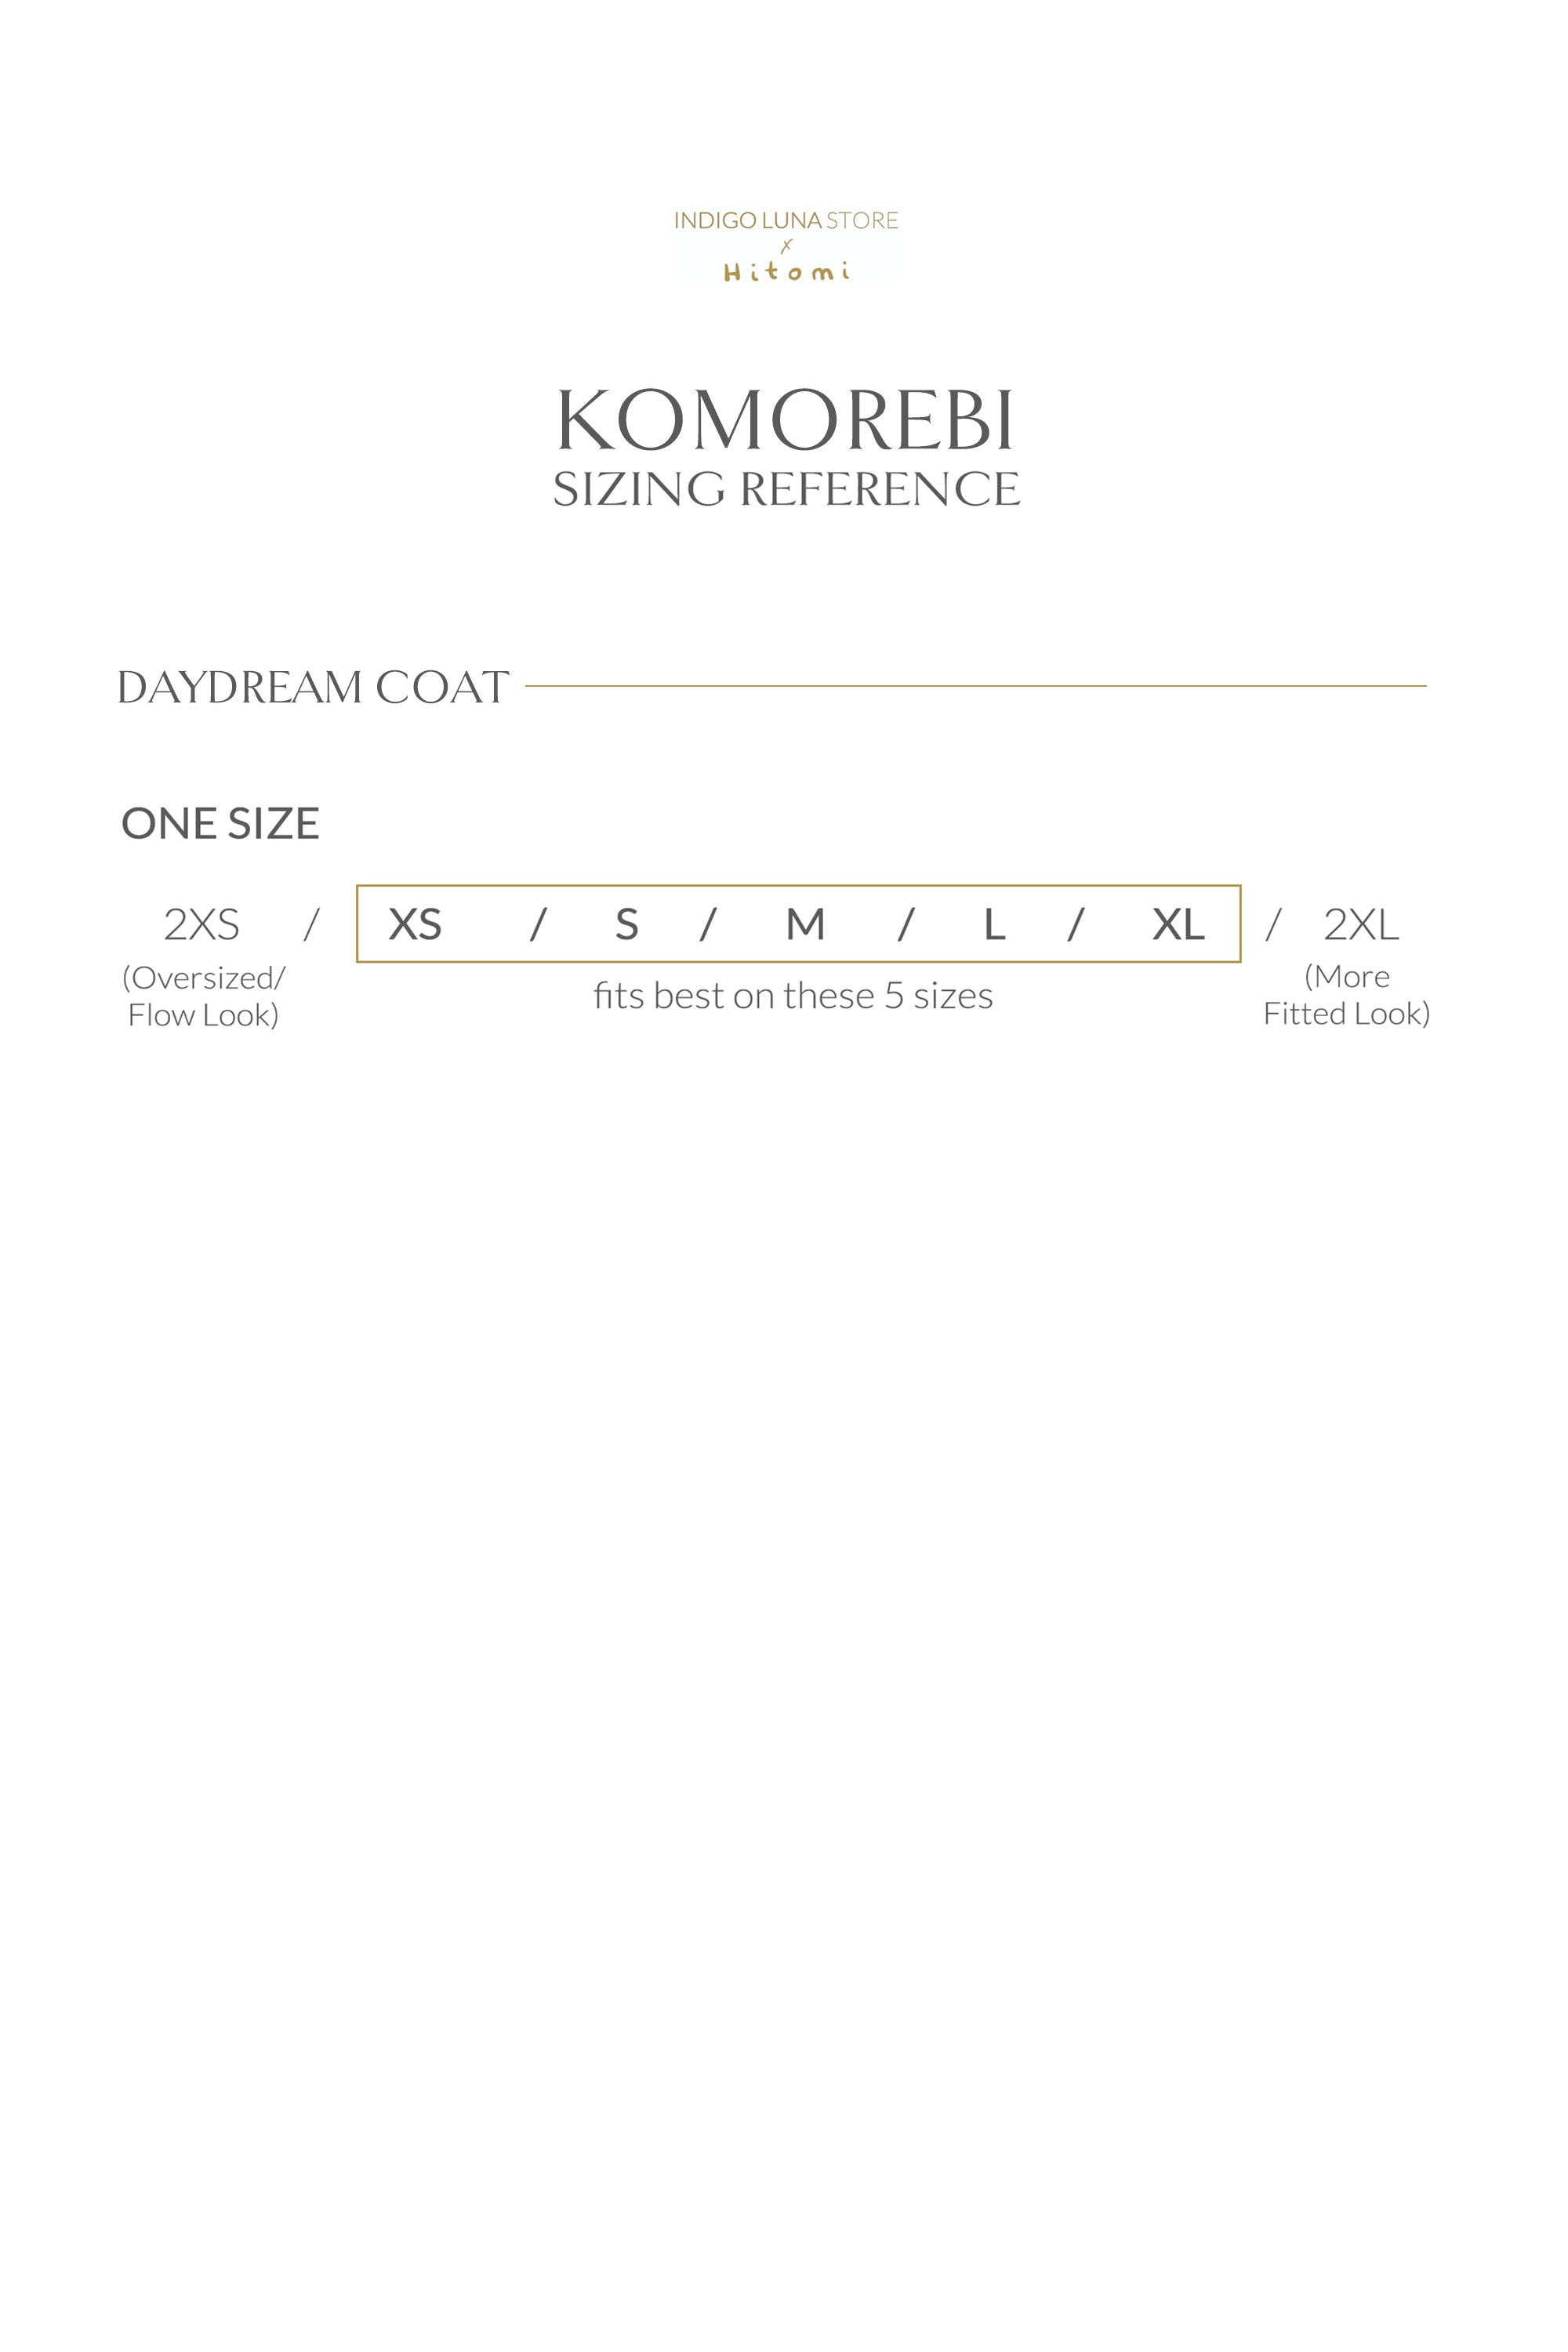 Daydream Coat Sizing Reference